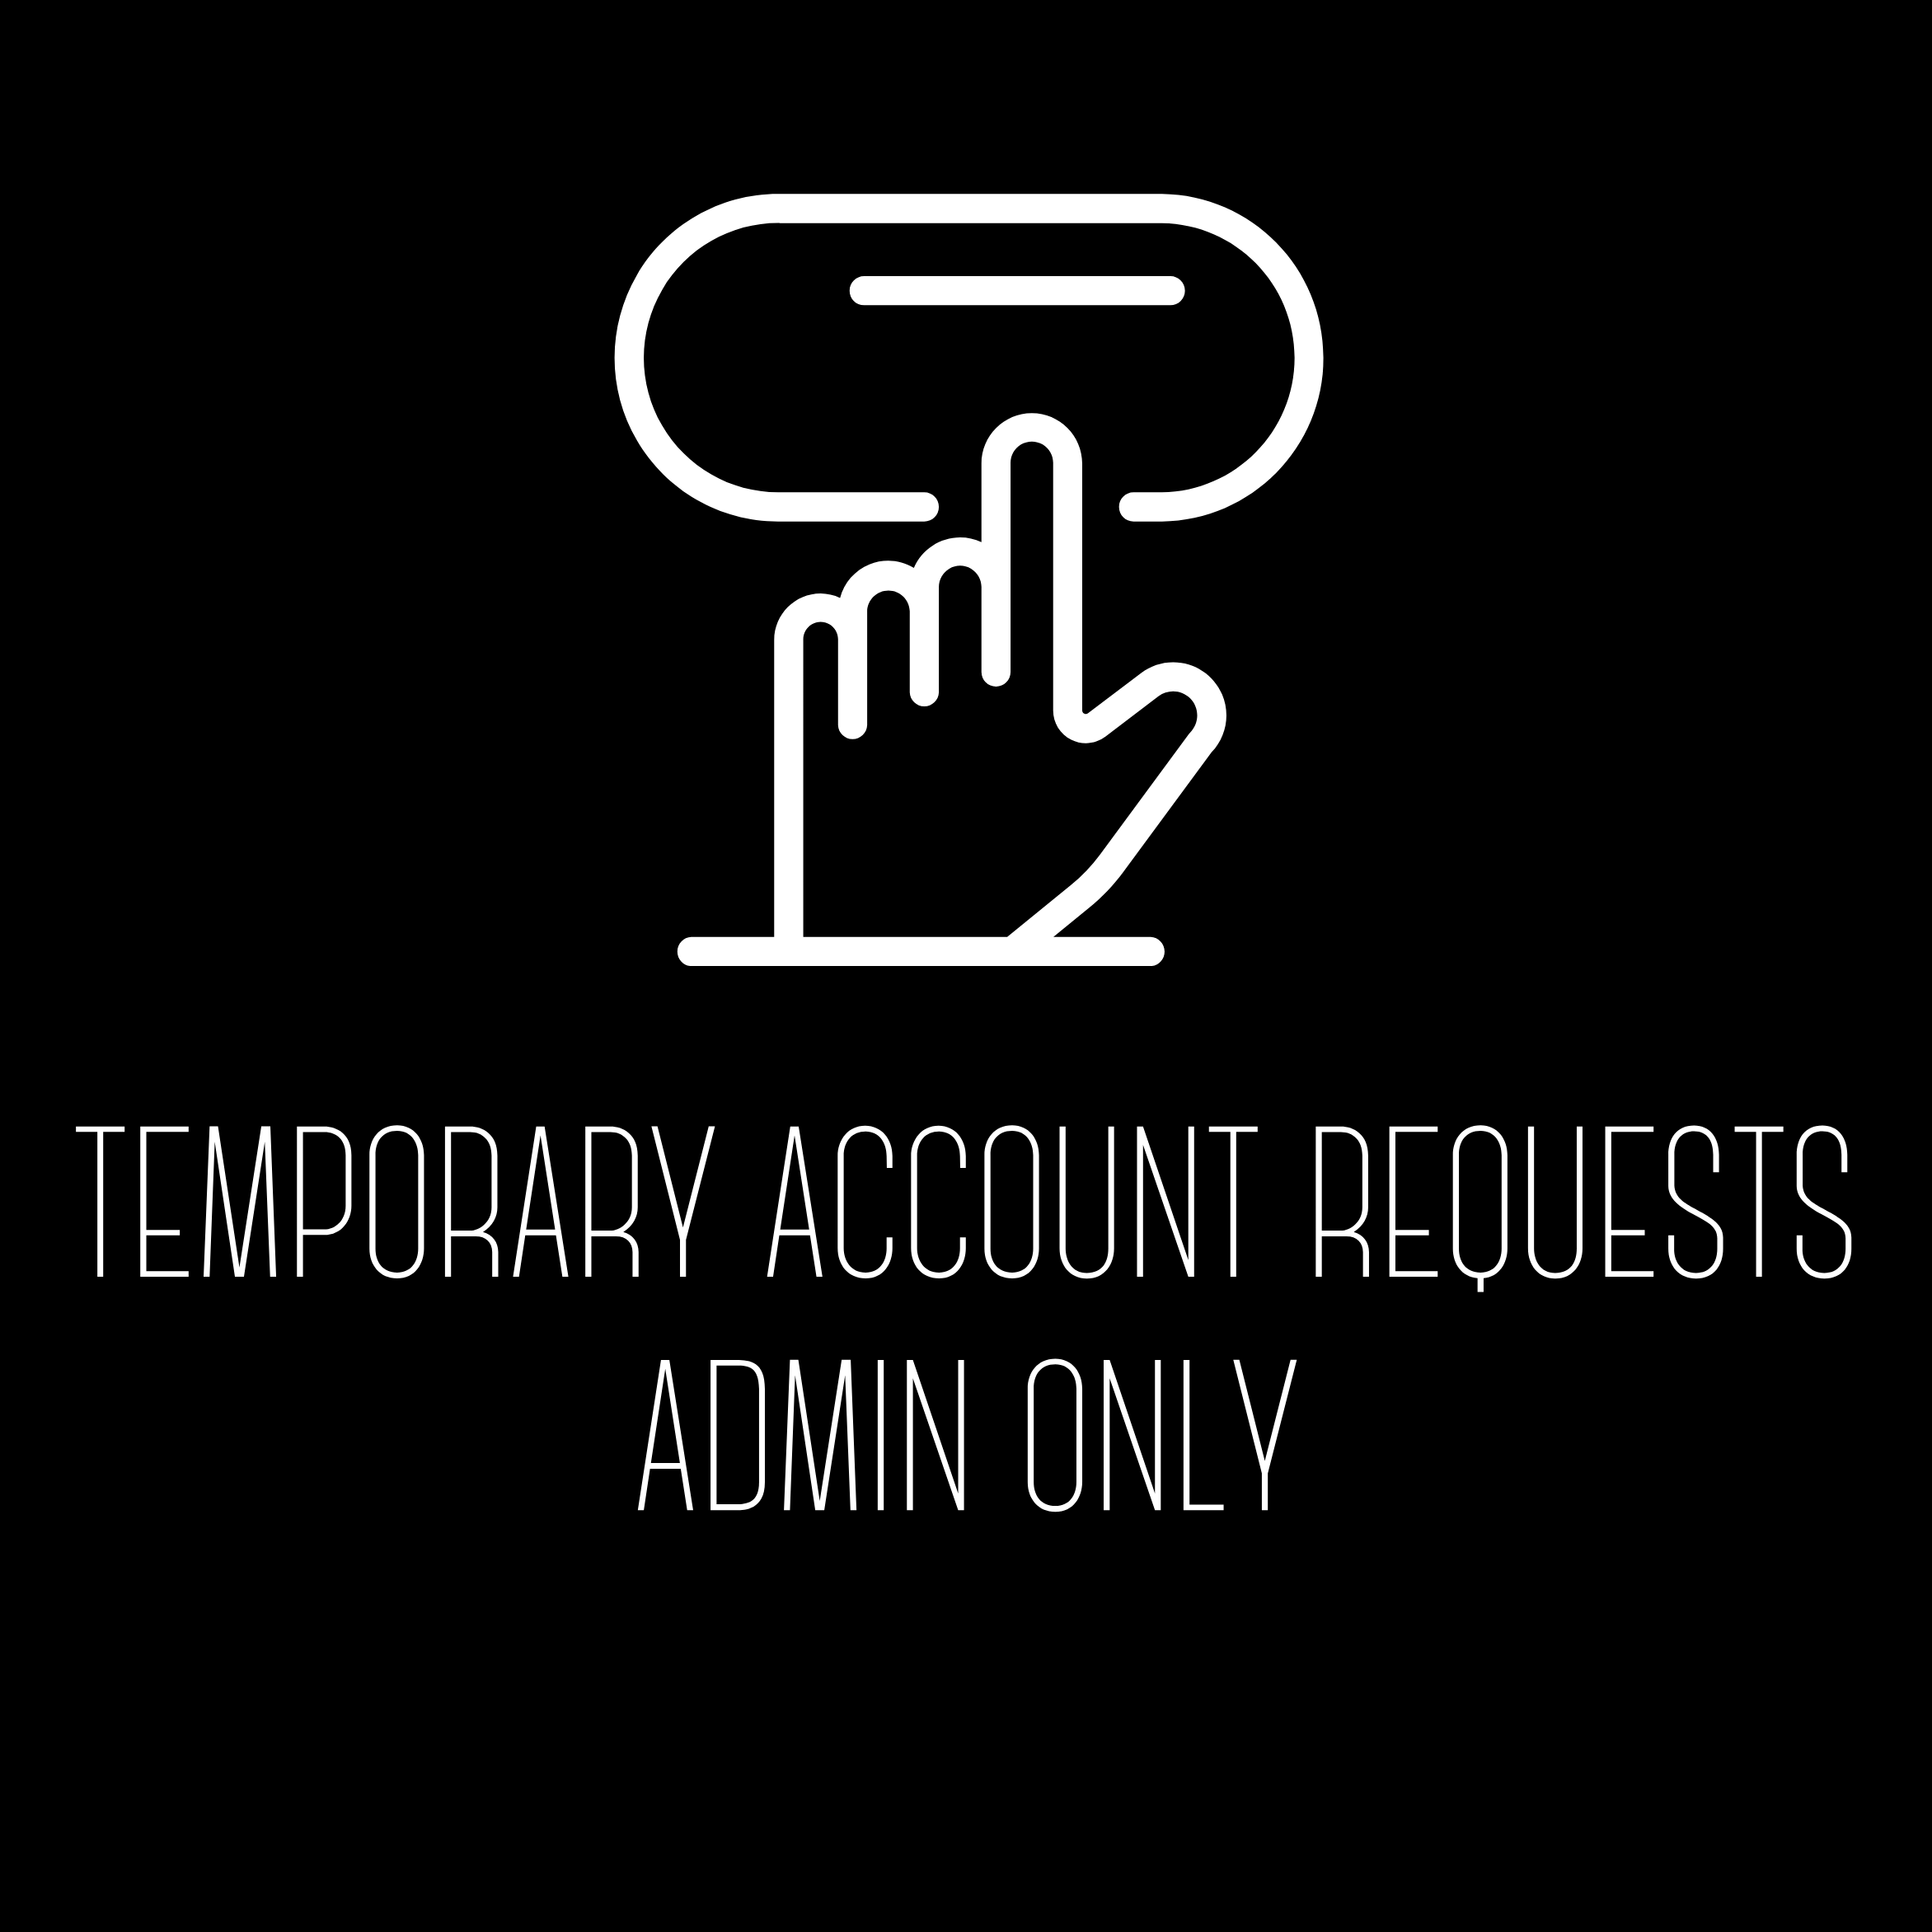 Temporary Account Requests